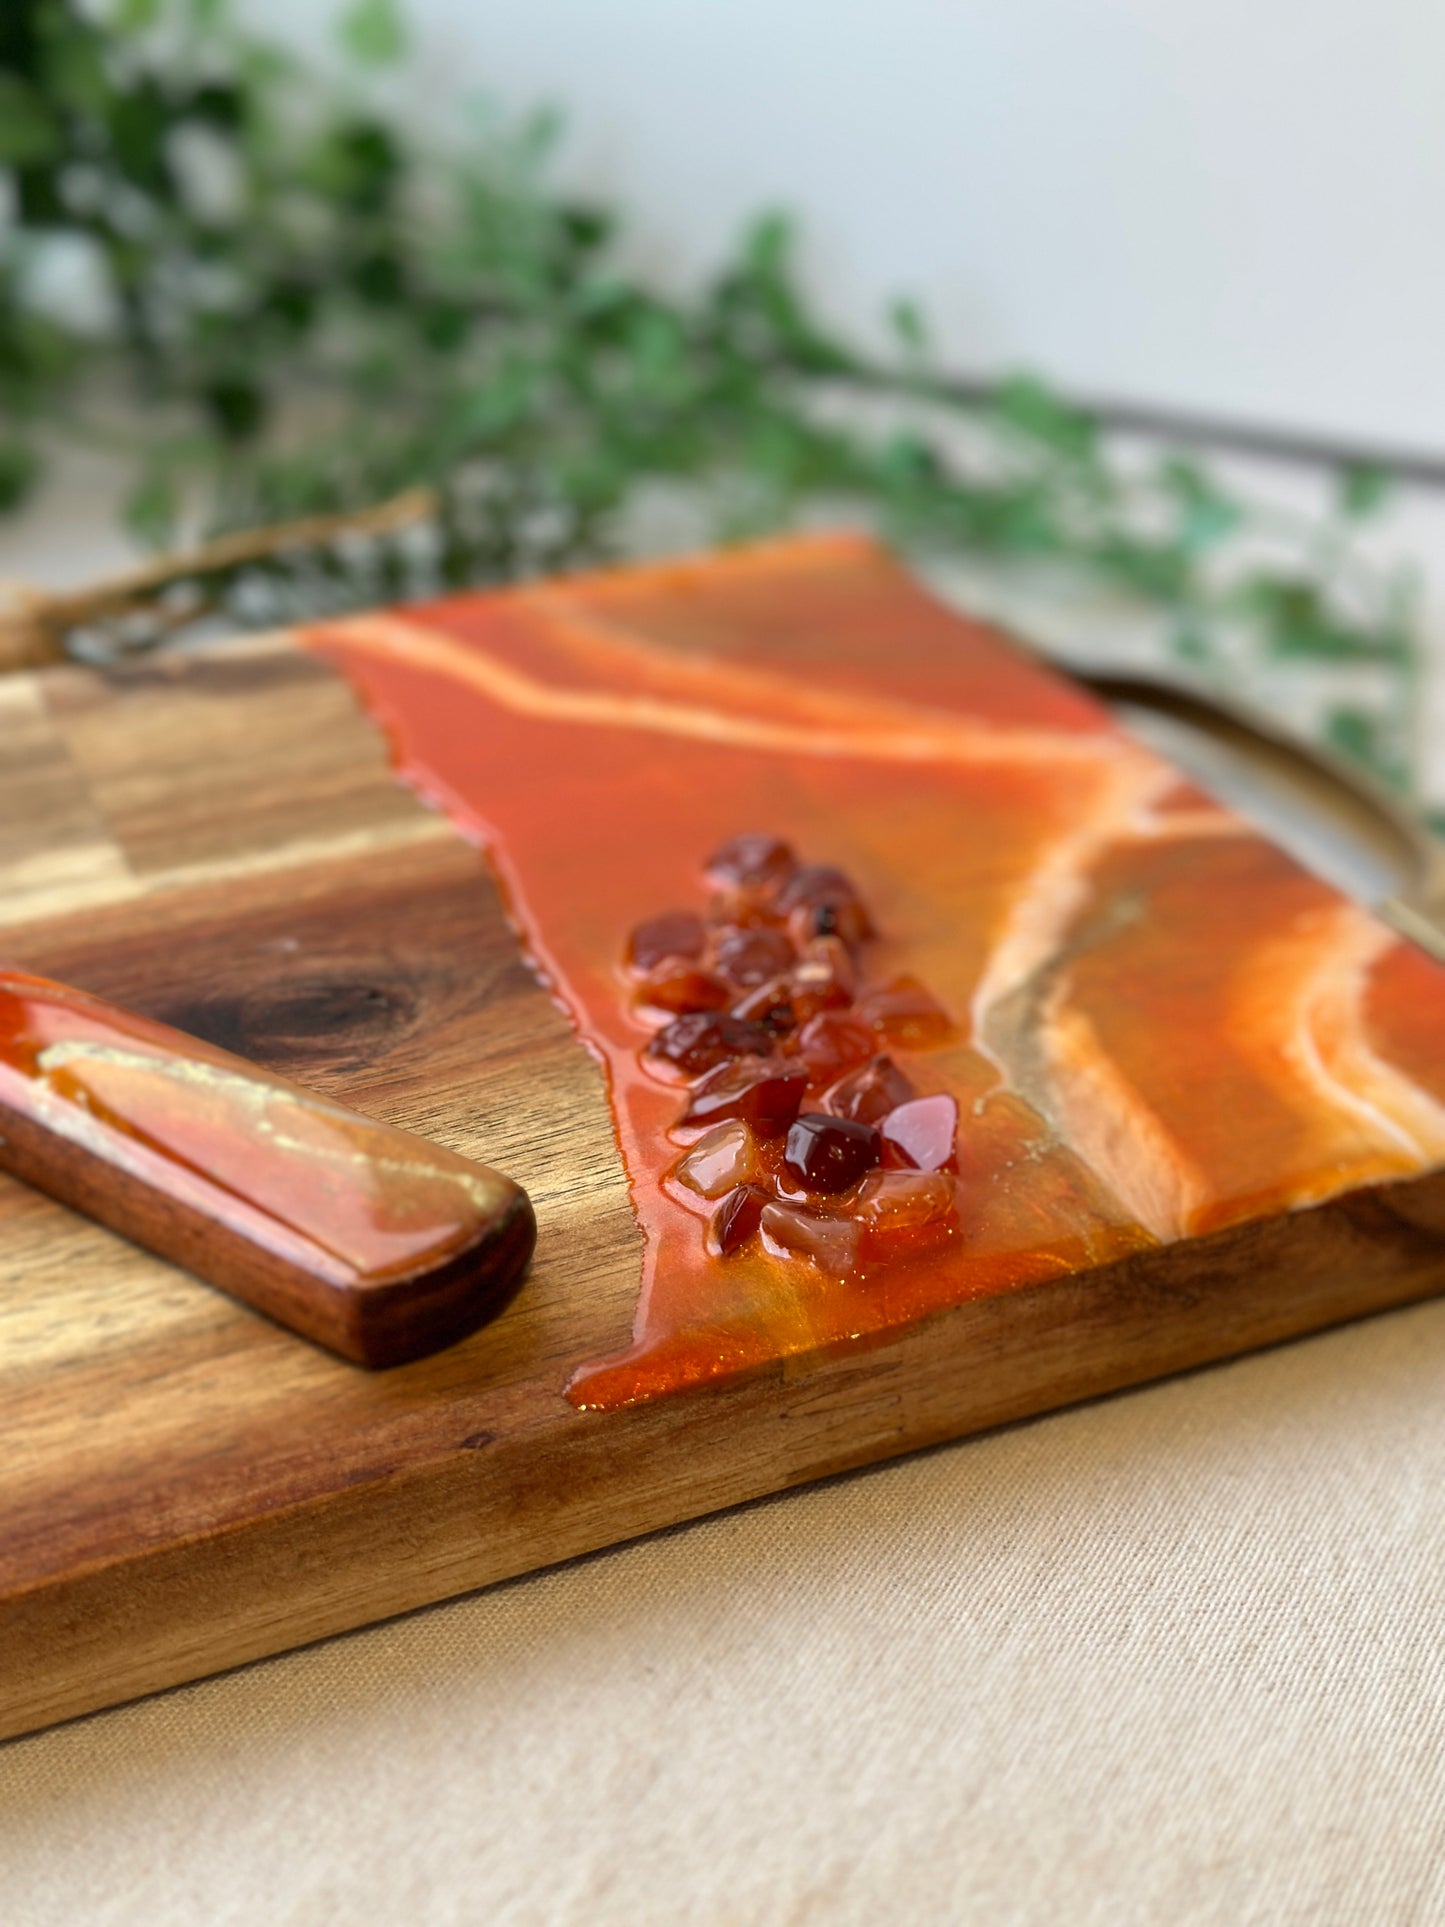 SERVING BOARD - metallic orange resin with real red carnelian gems, serving board with matching knife